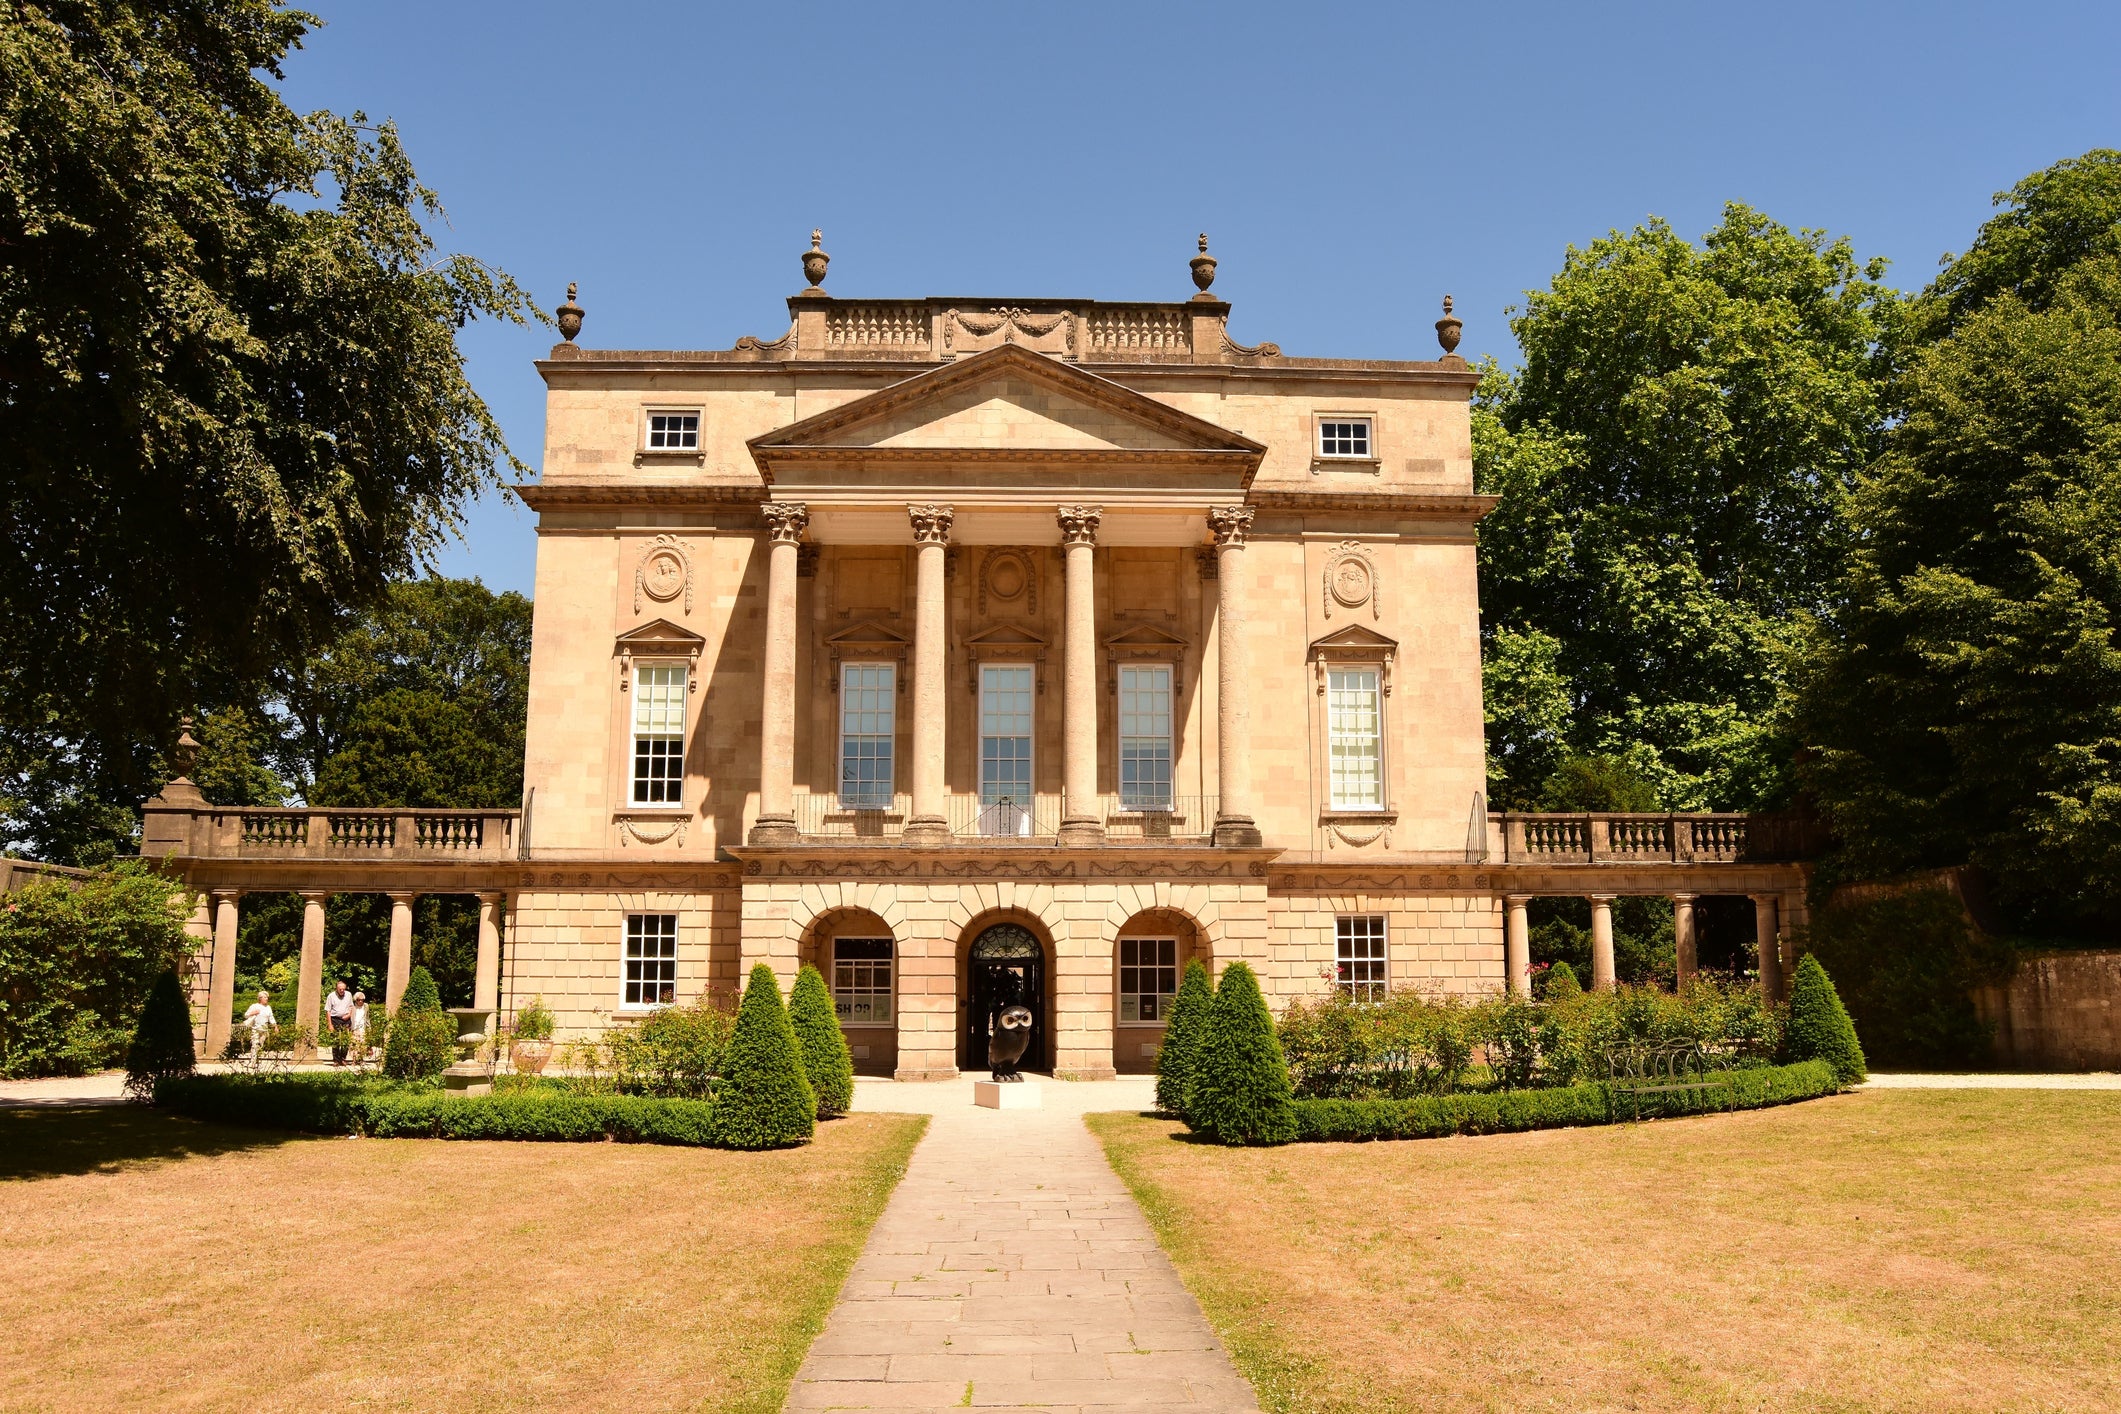 The Holburne Museum doubles as Lady Danbury’s home